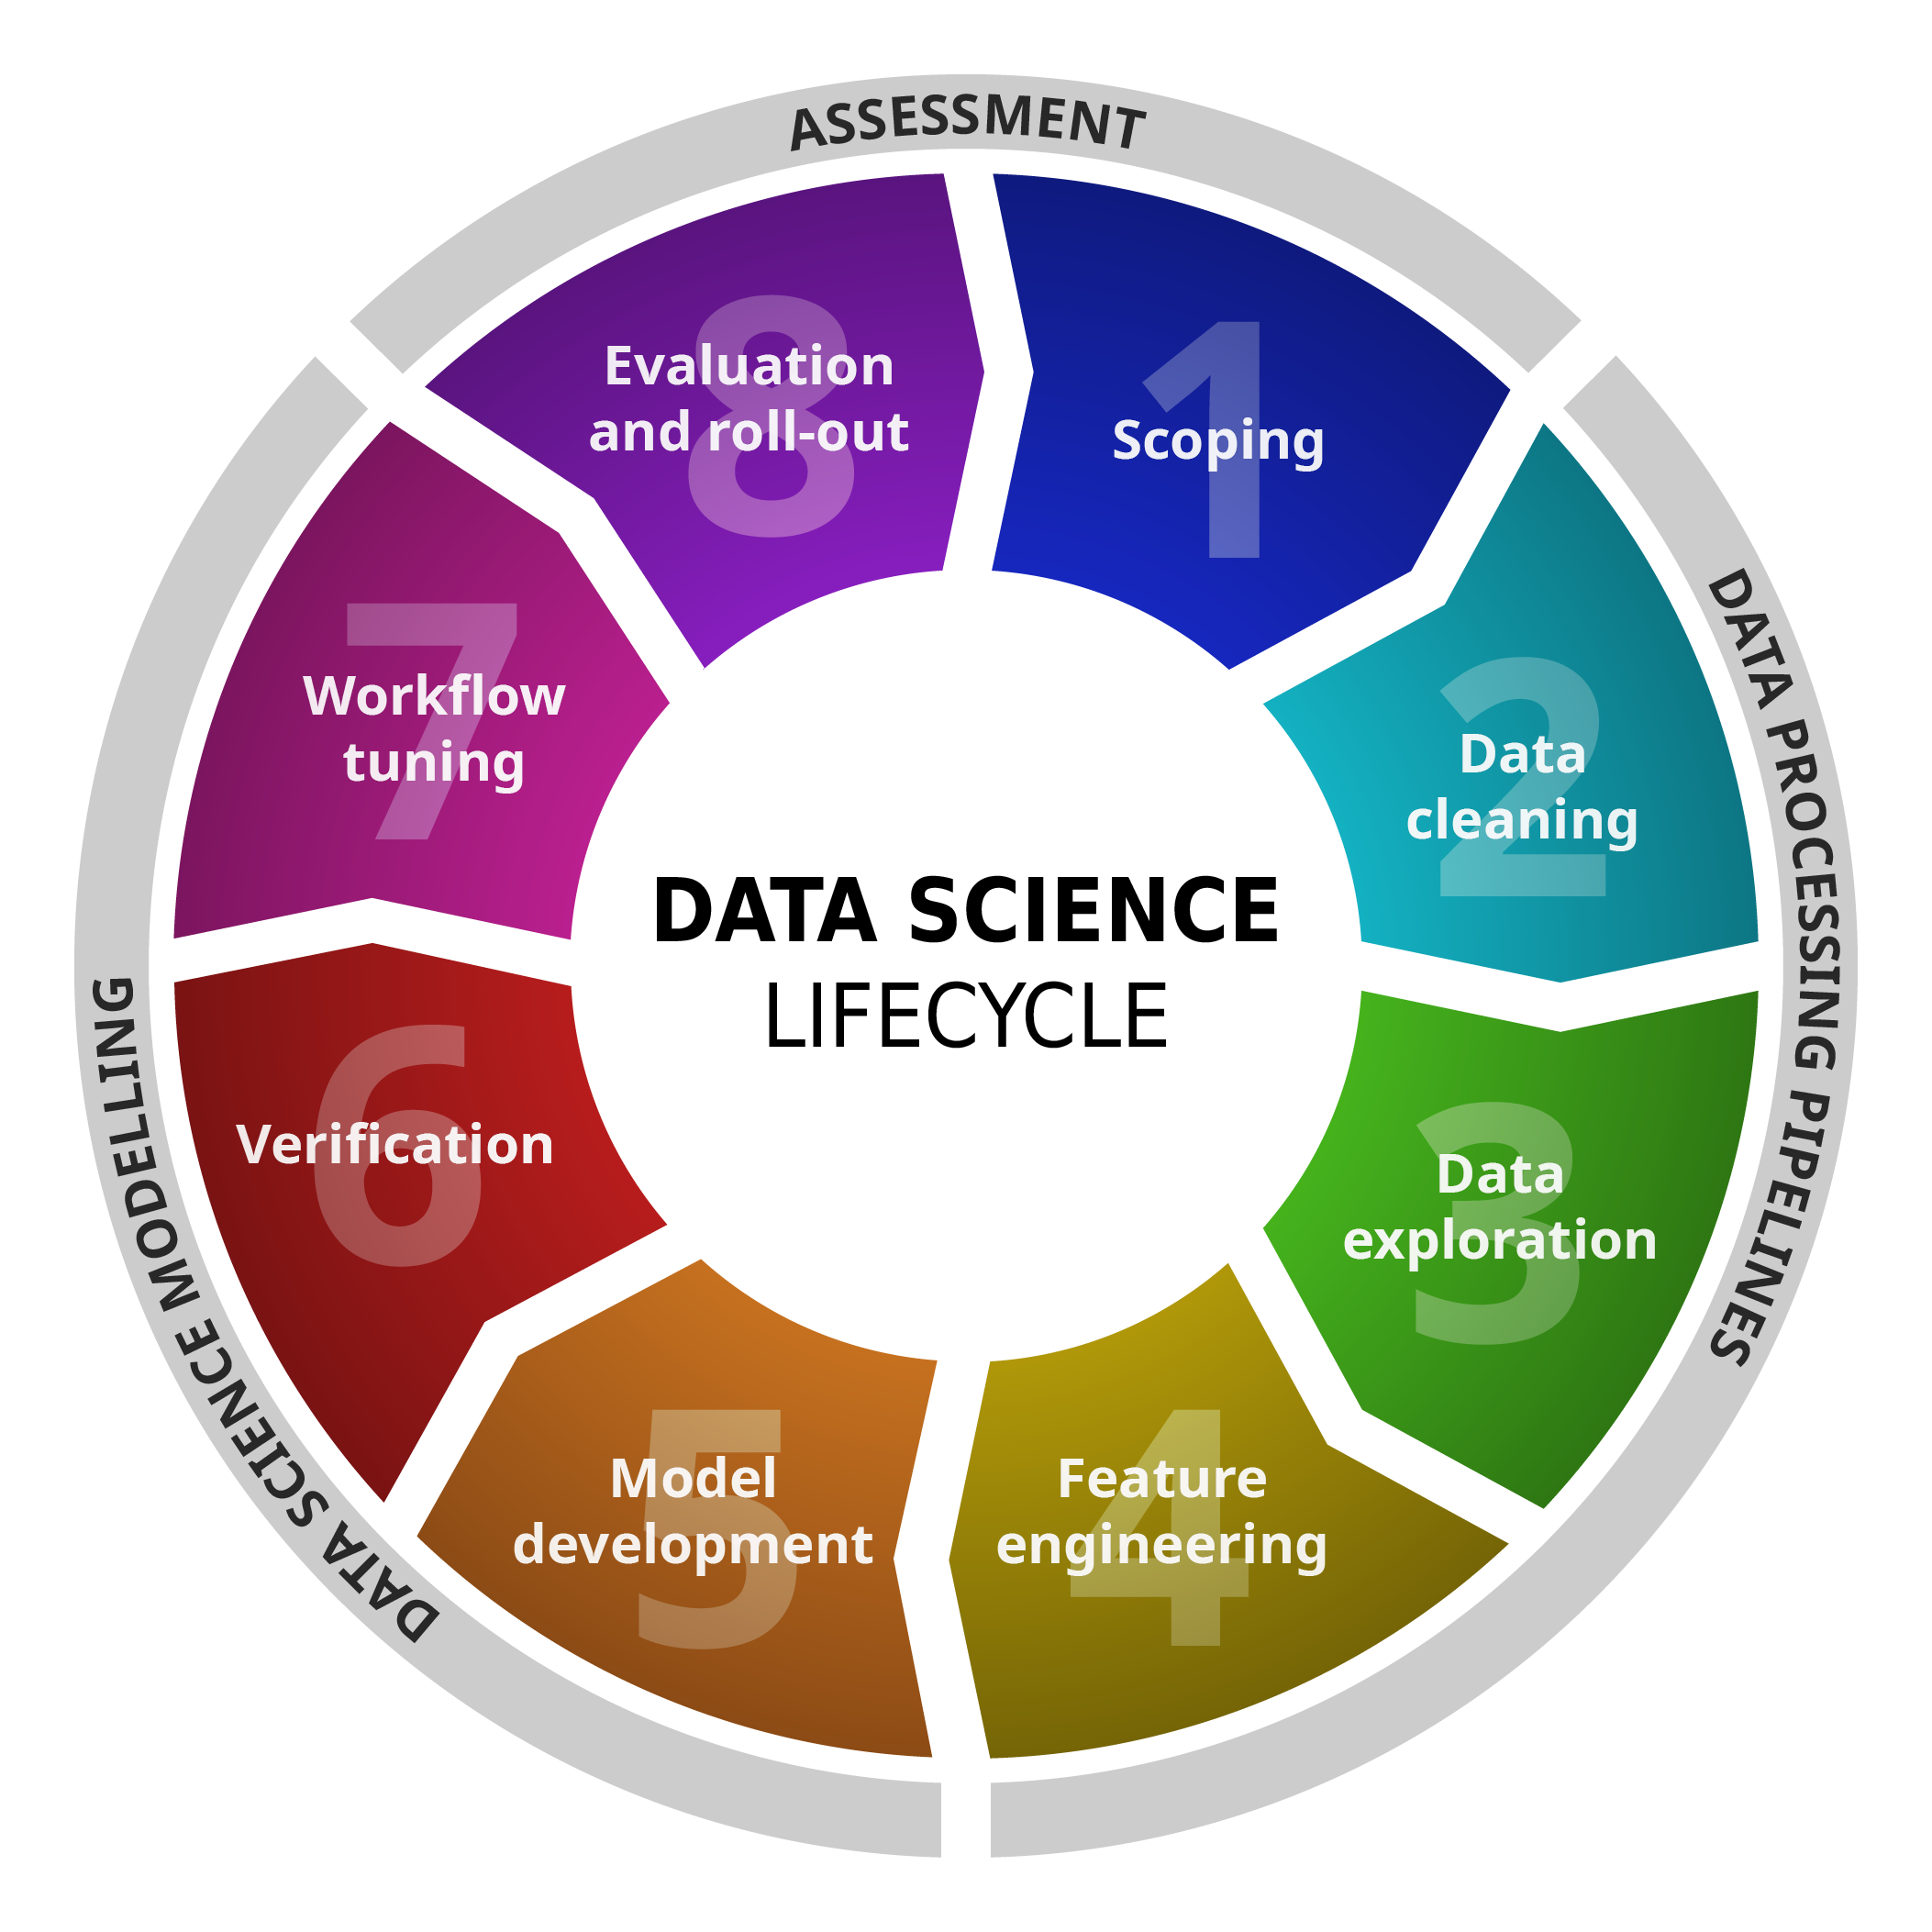 The data science lifecycle